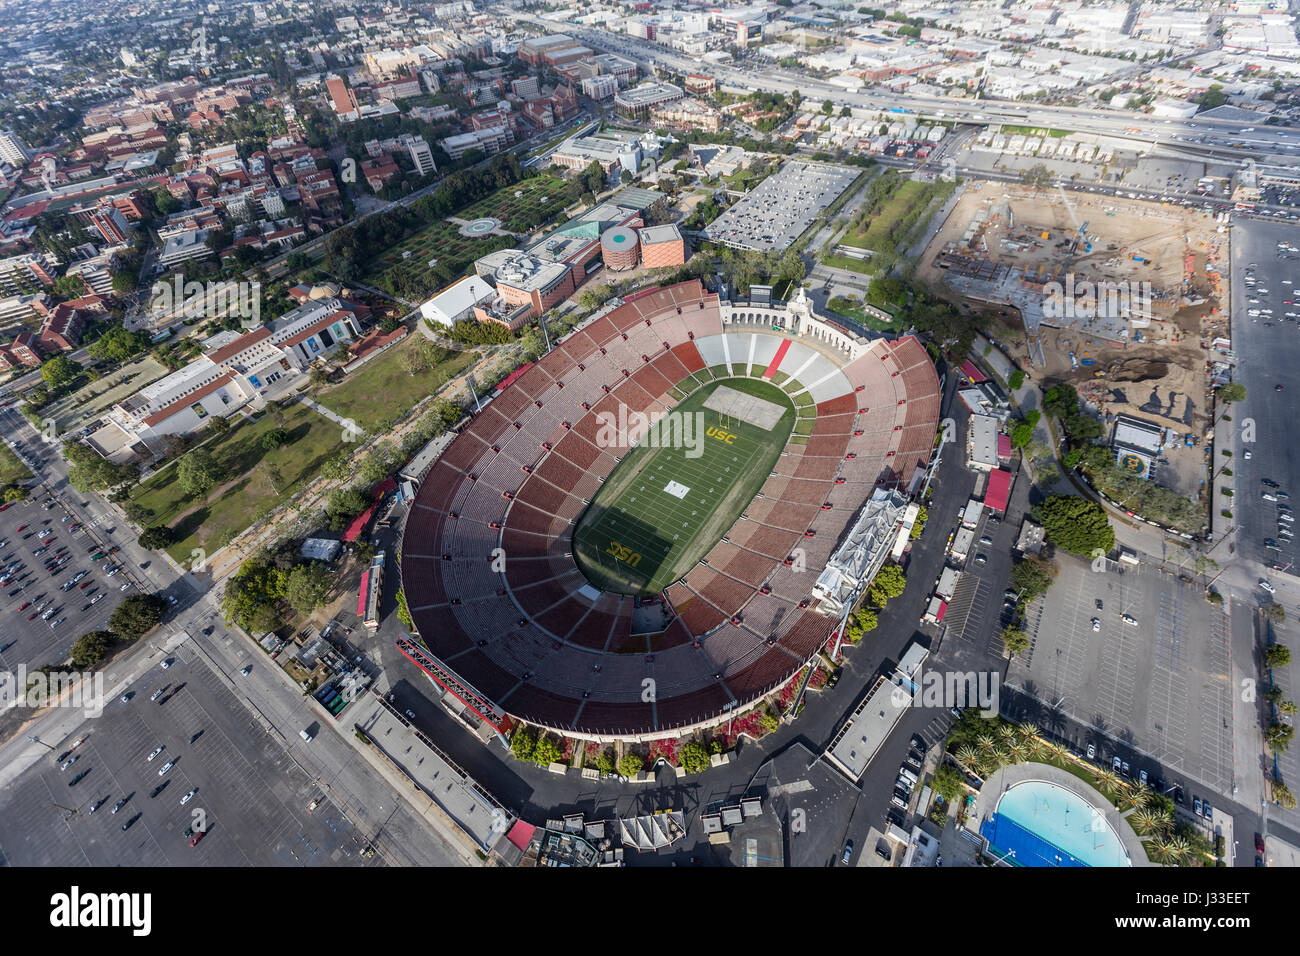 Los Angeles, California, USA - April 12, 2017:  Aerial view of the historic Coliseum stadium near the University of Southern California. Stock Photo